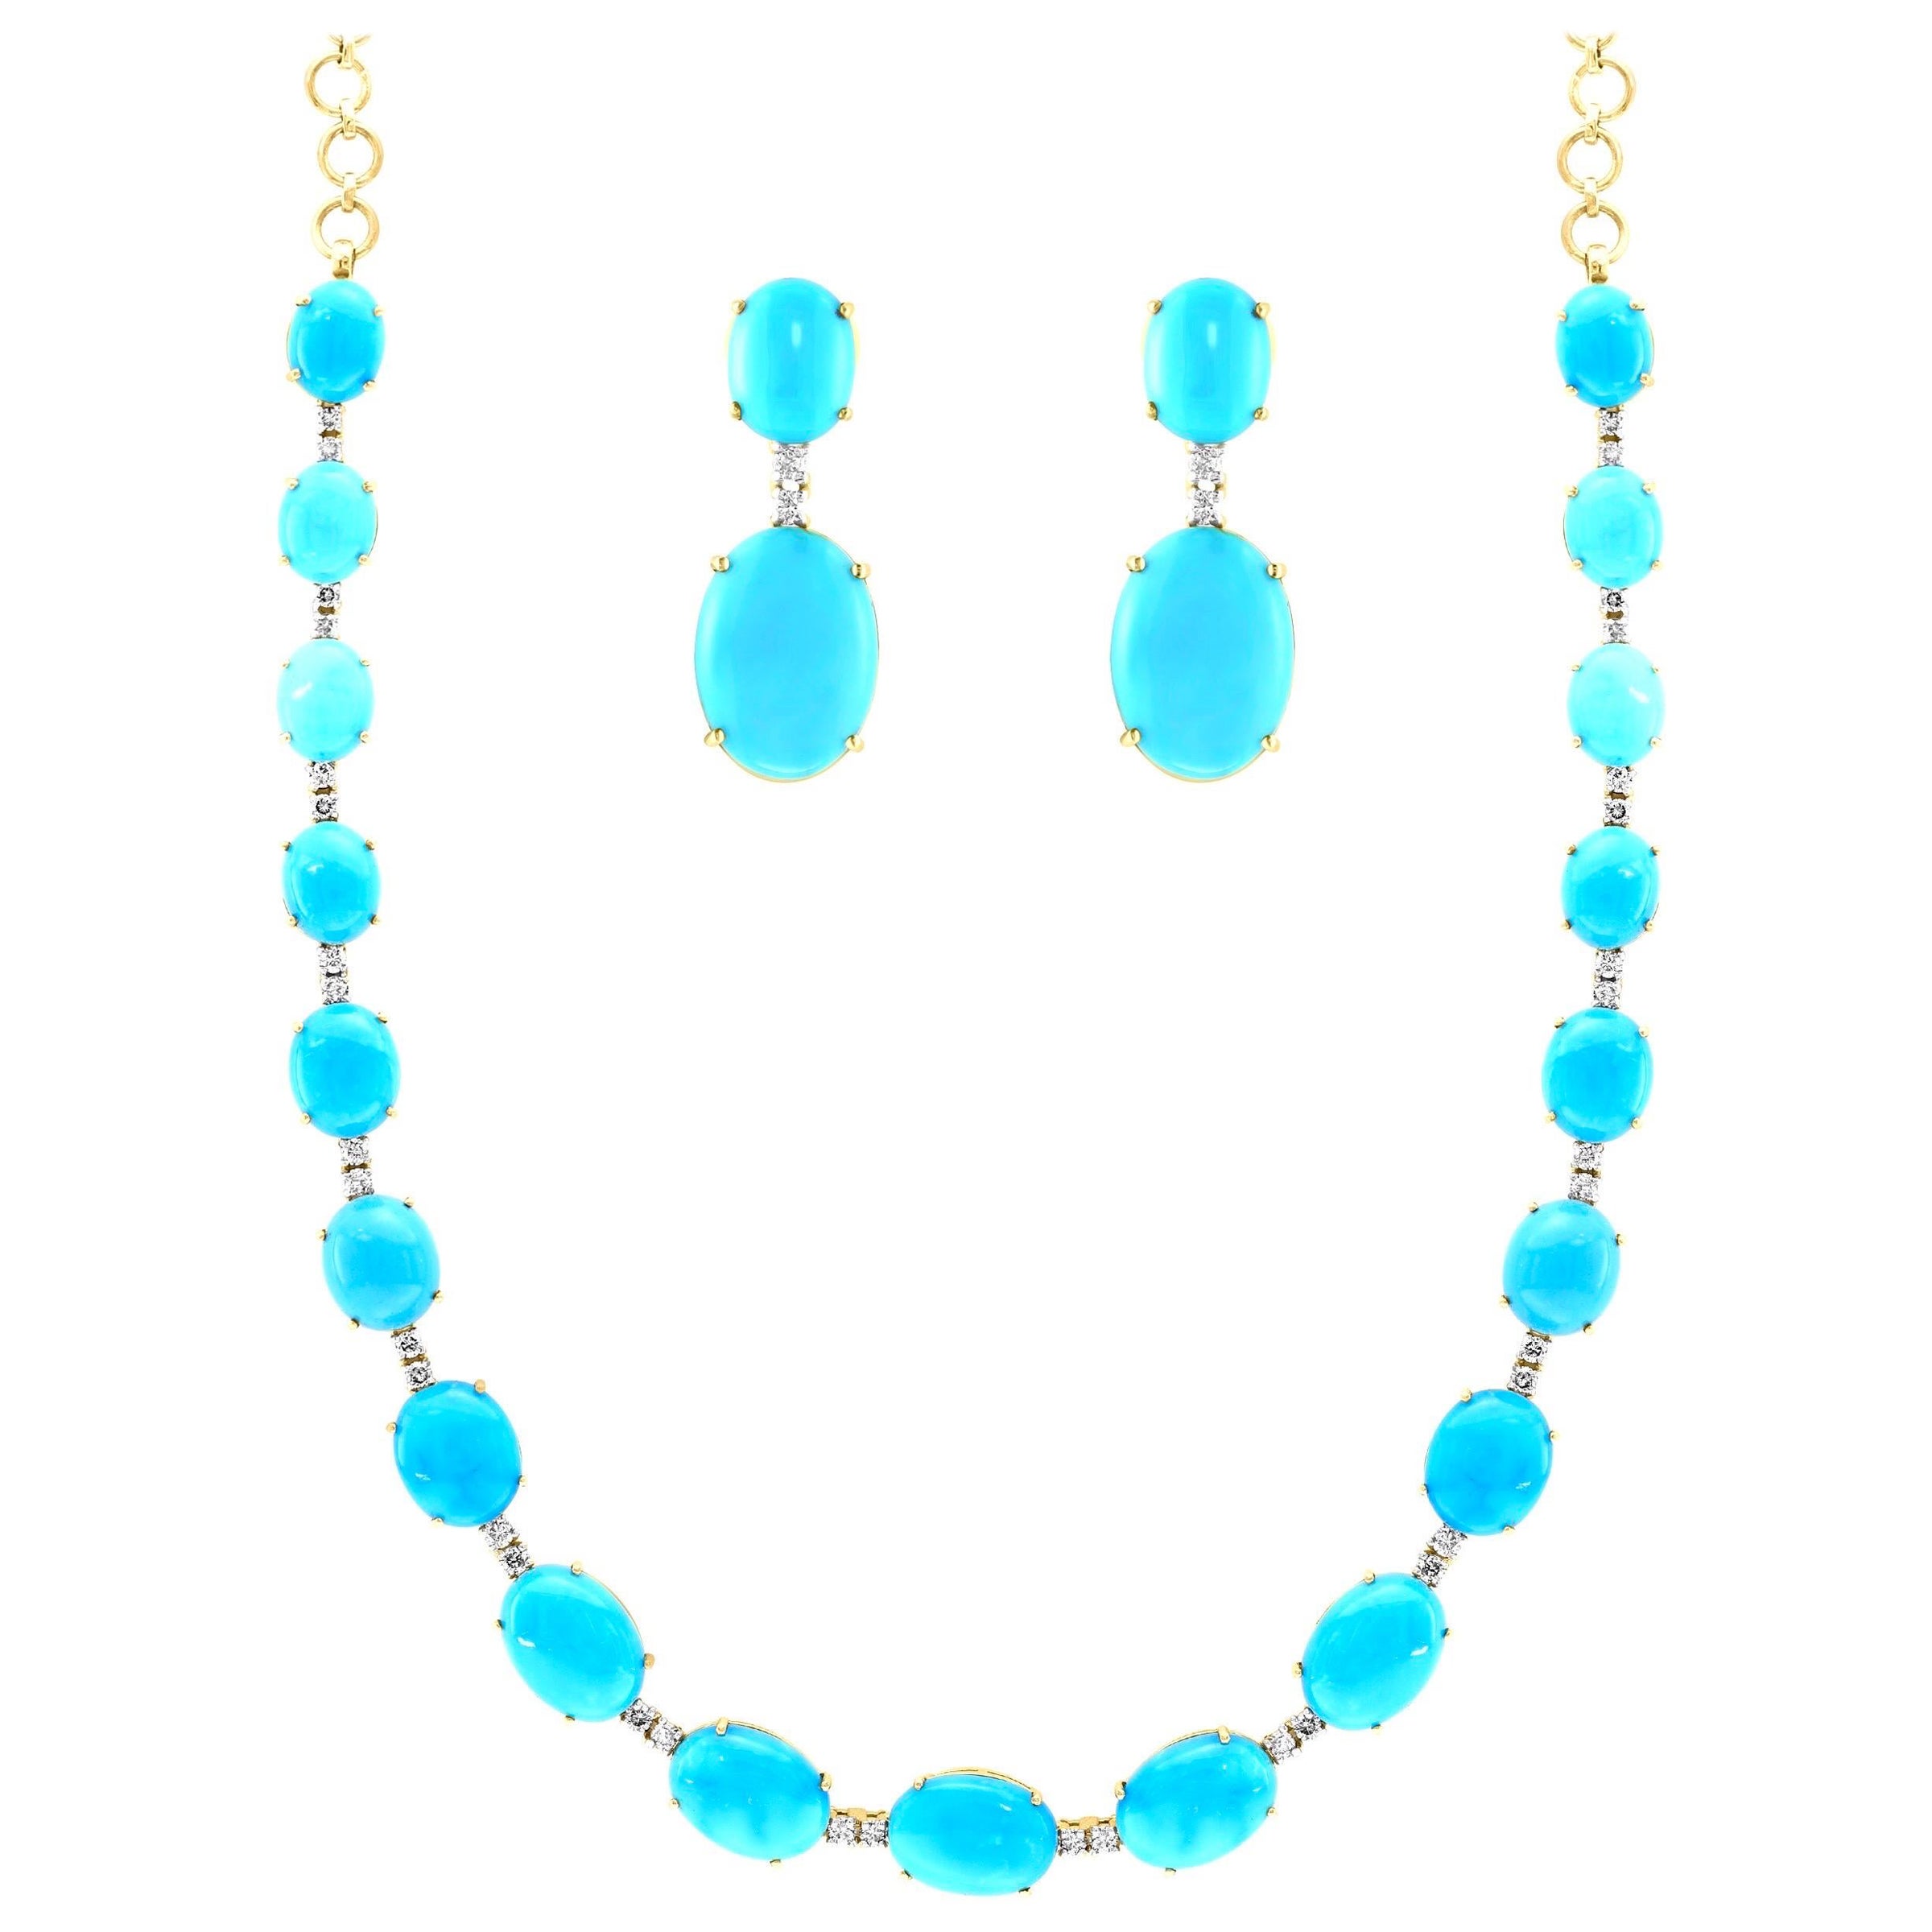 60ct Natural Sleeping Beauty Turquoise & Diamond Tennis Necklace & Earrings Set